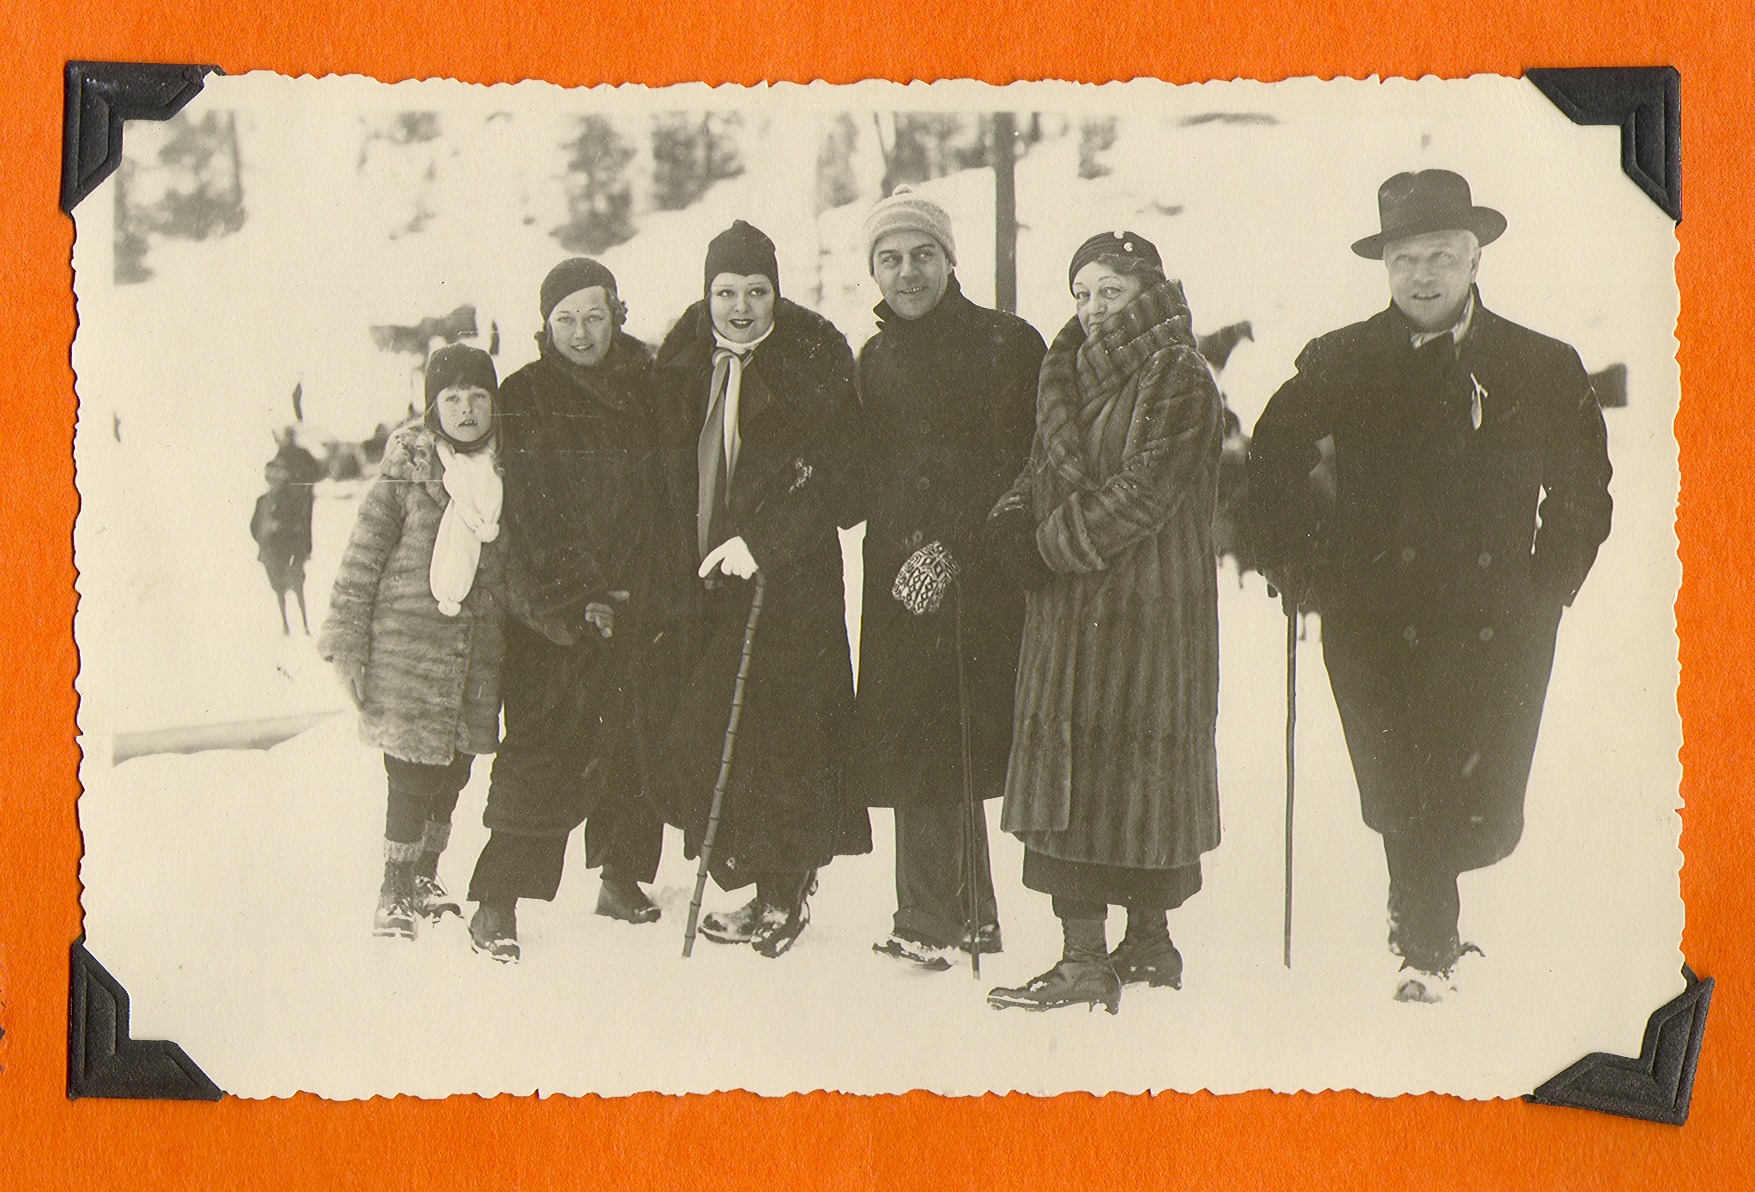 Clara Bow Bell and a group of unidentified people at bottom of ski slopes in Europe: photographic print